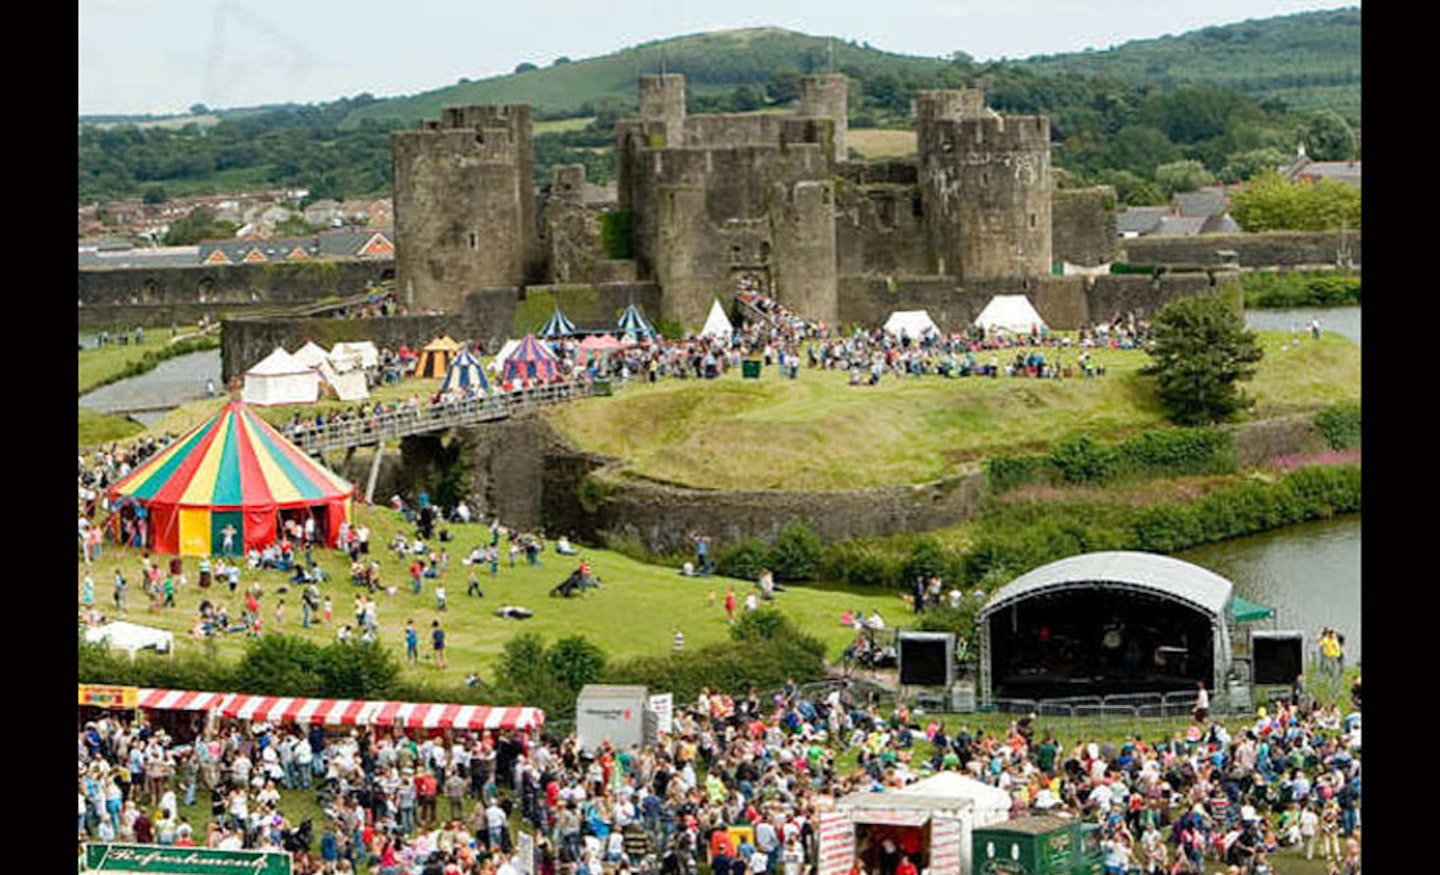 The Big Cheese (26-28th July, Caerphilly, Wales)